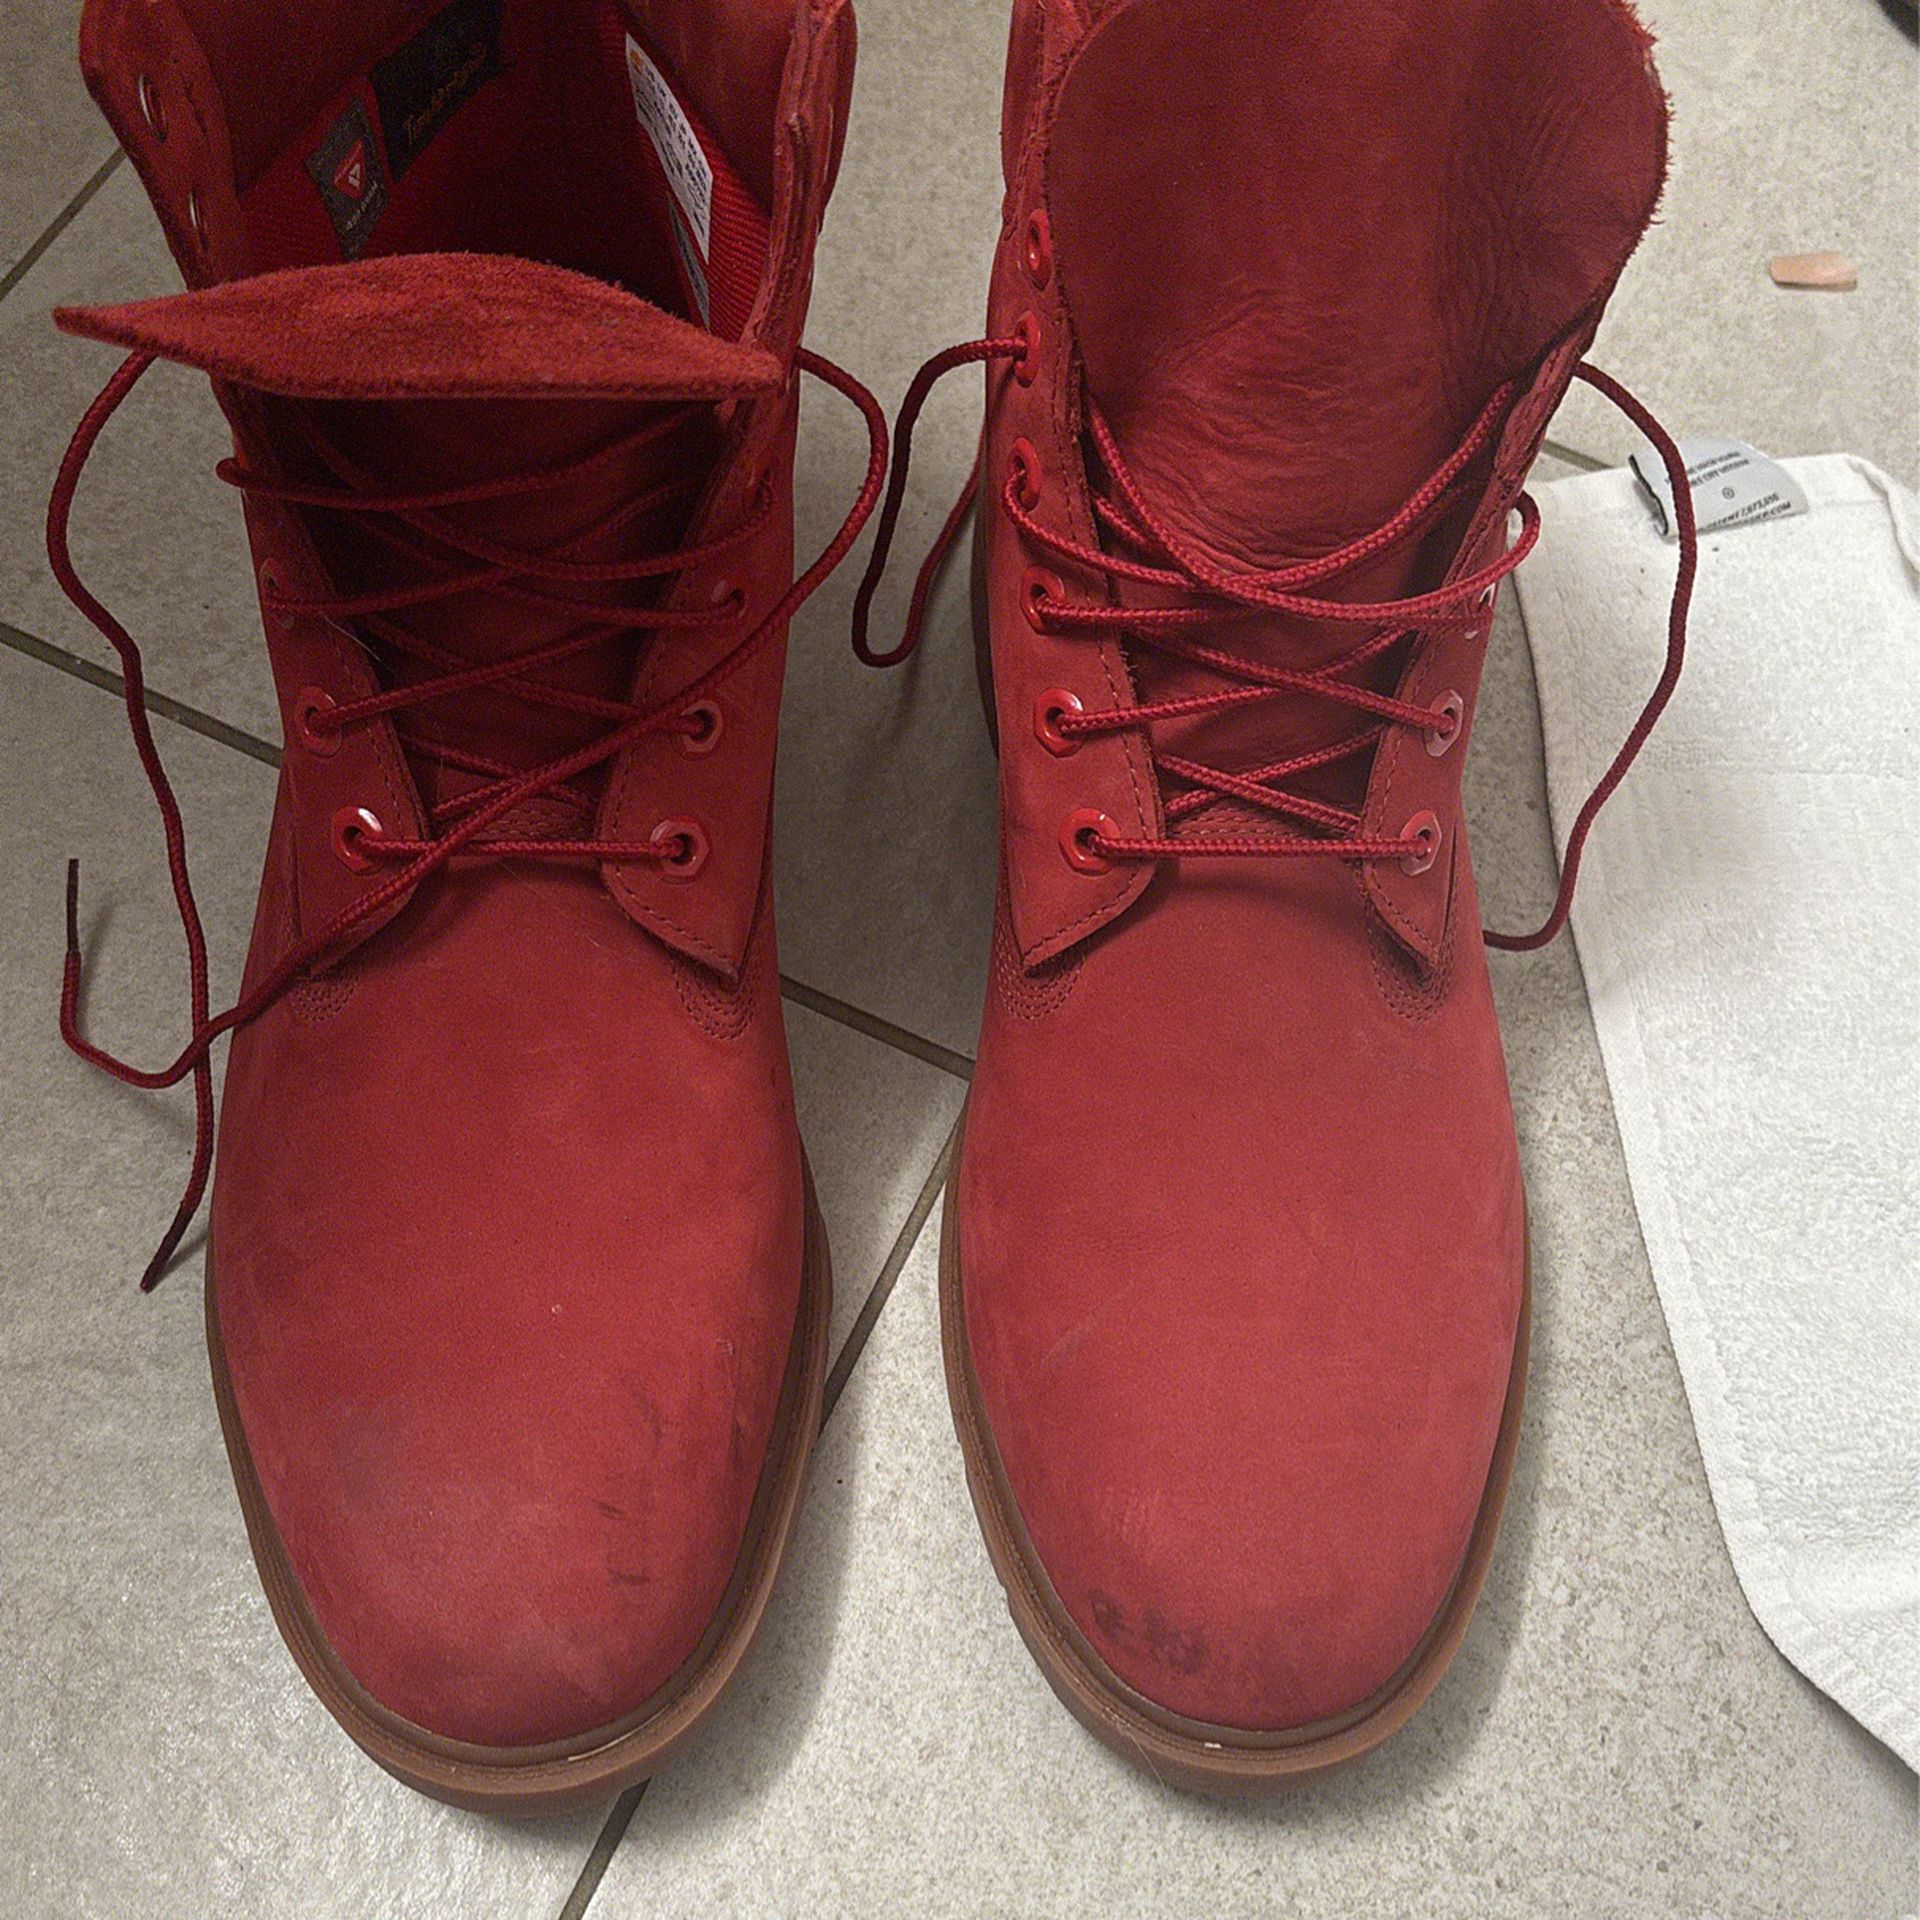 Red Timber Land Boots 